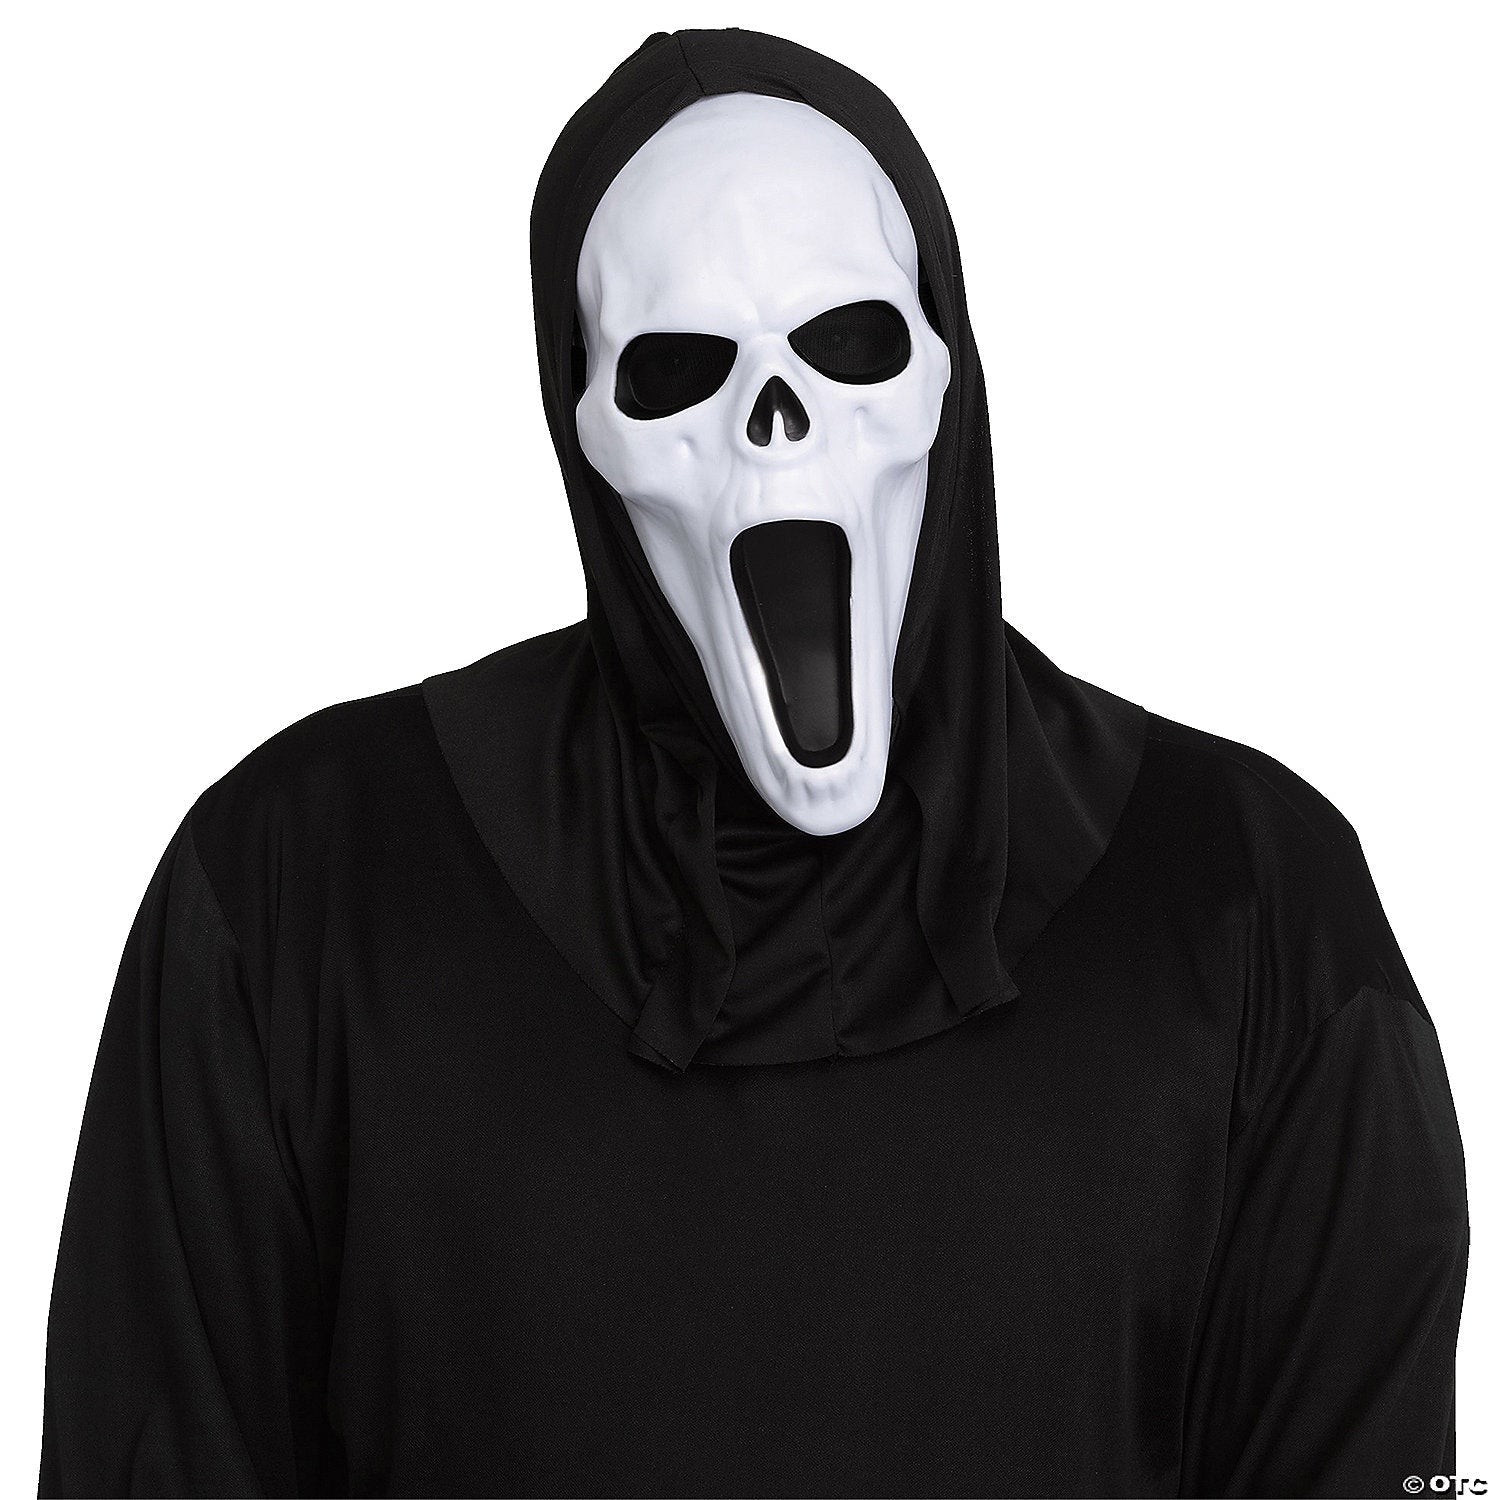 Dead by Daylight Scorched Ghostface Mask 